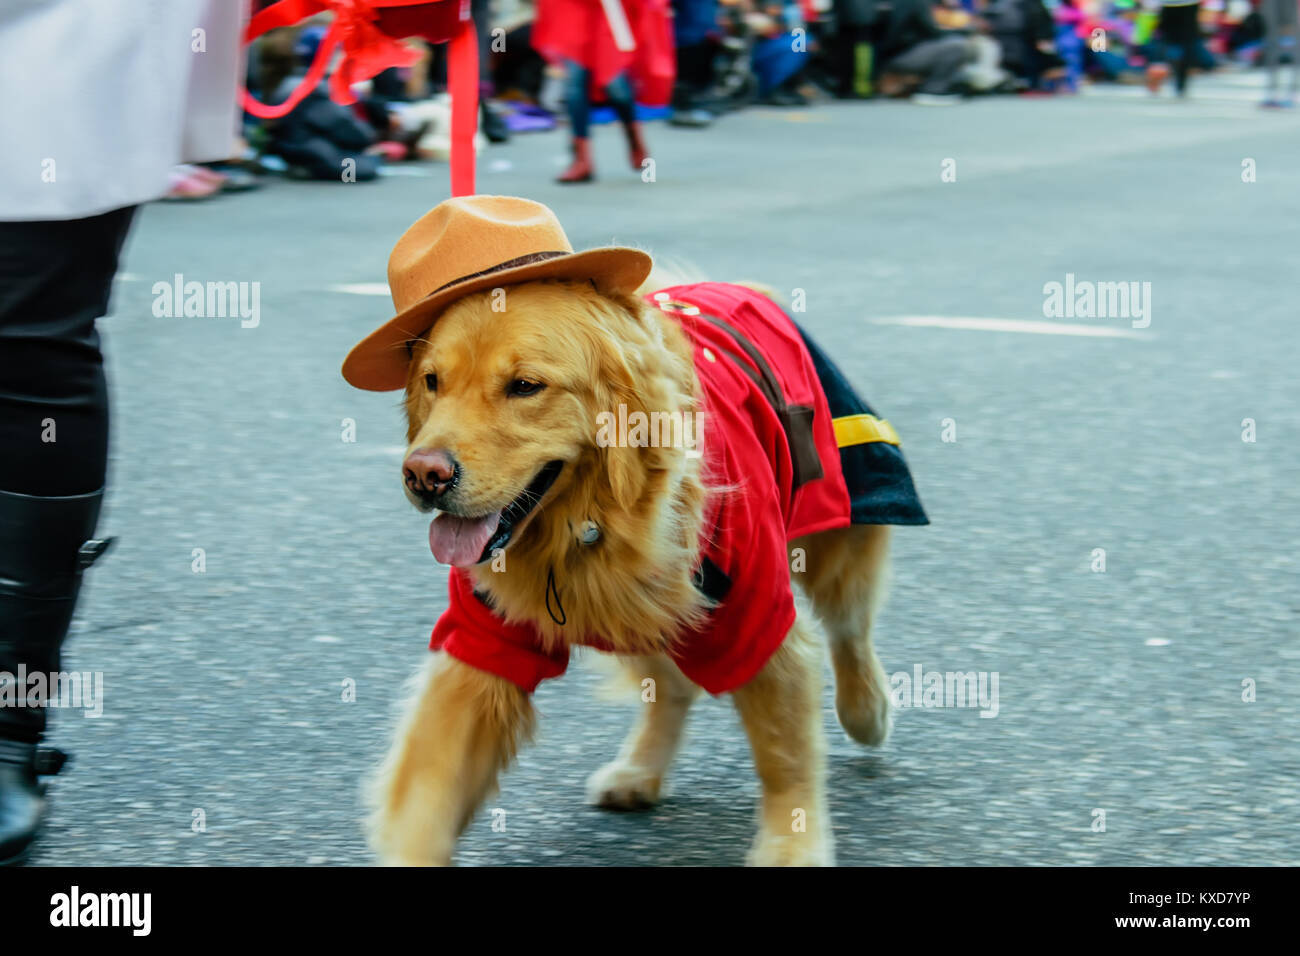 An animal is a red-haired dog in a brown hat and red clothes walking along the street with an open mouth and an erect tongue Stock Photo